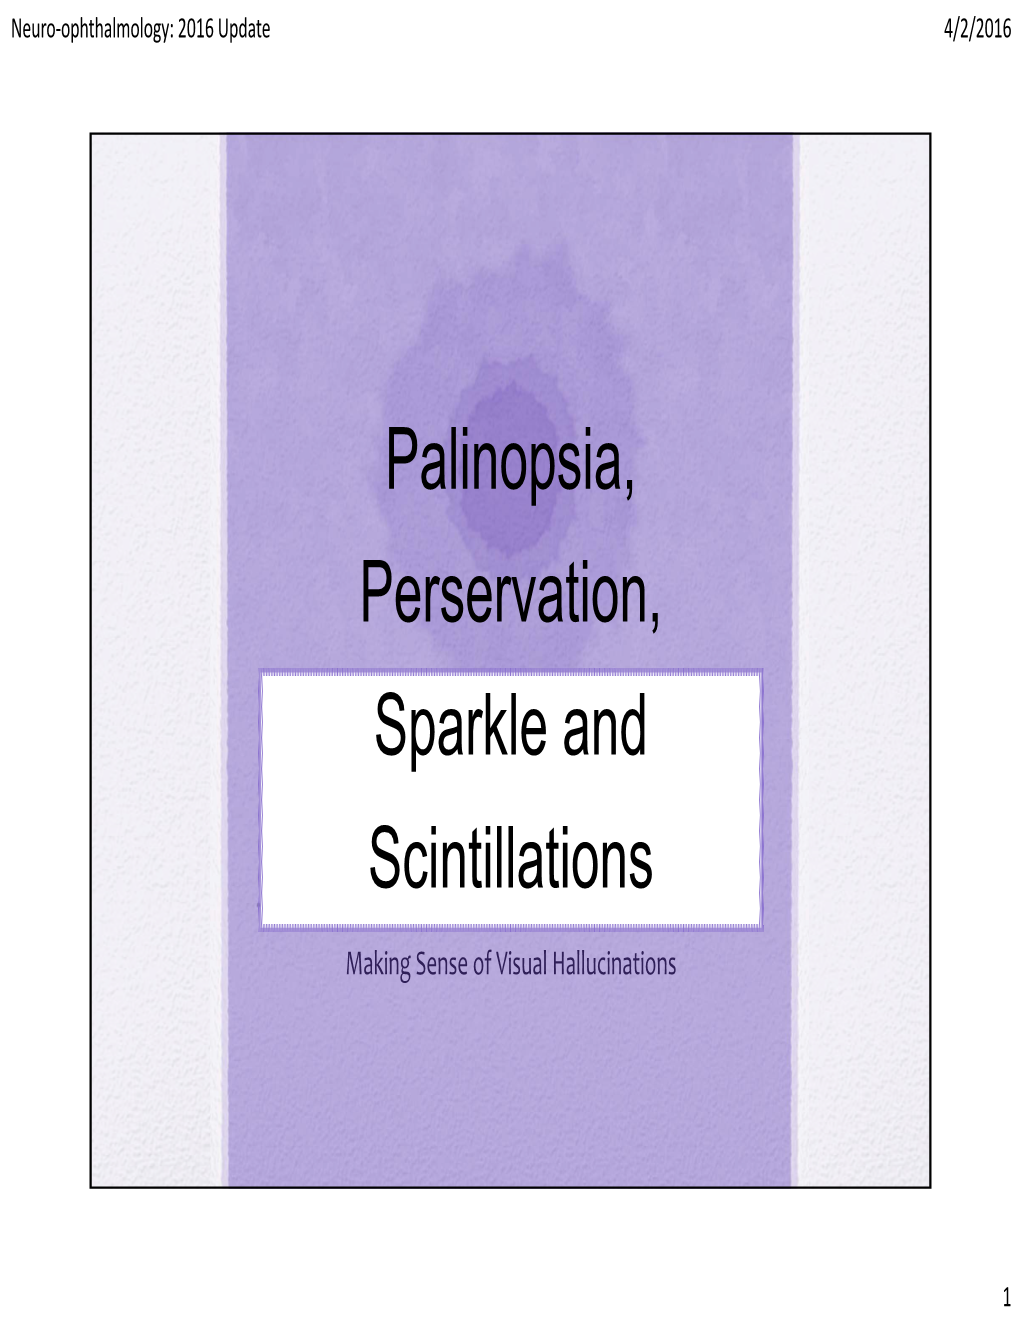 Palinopsia, Perservation, Sparkle and Scintillations